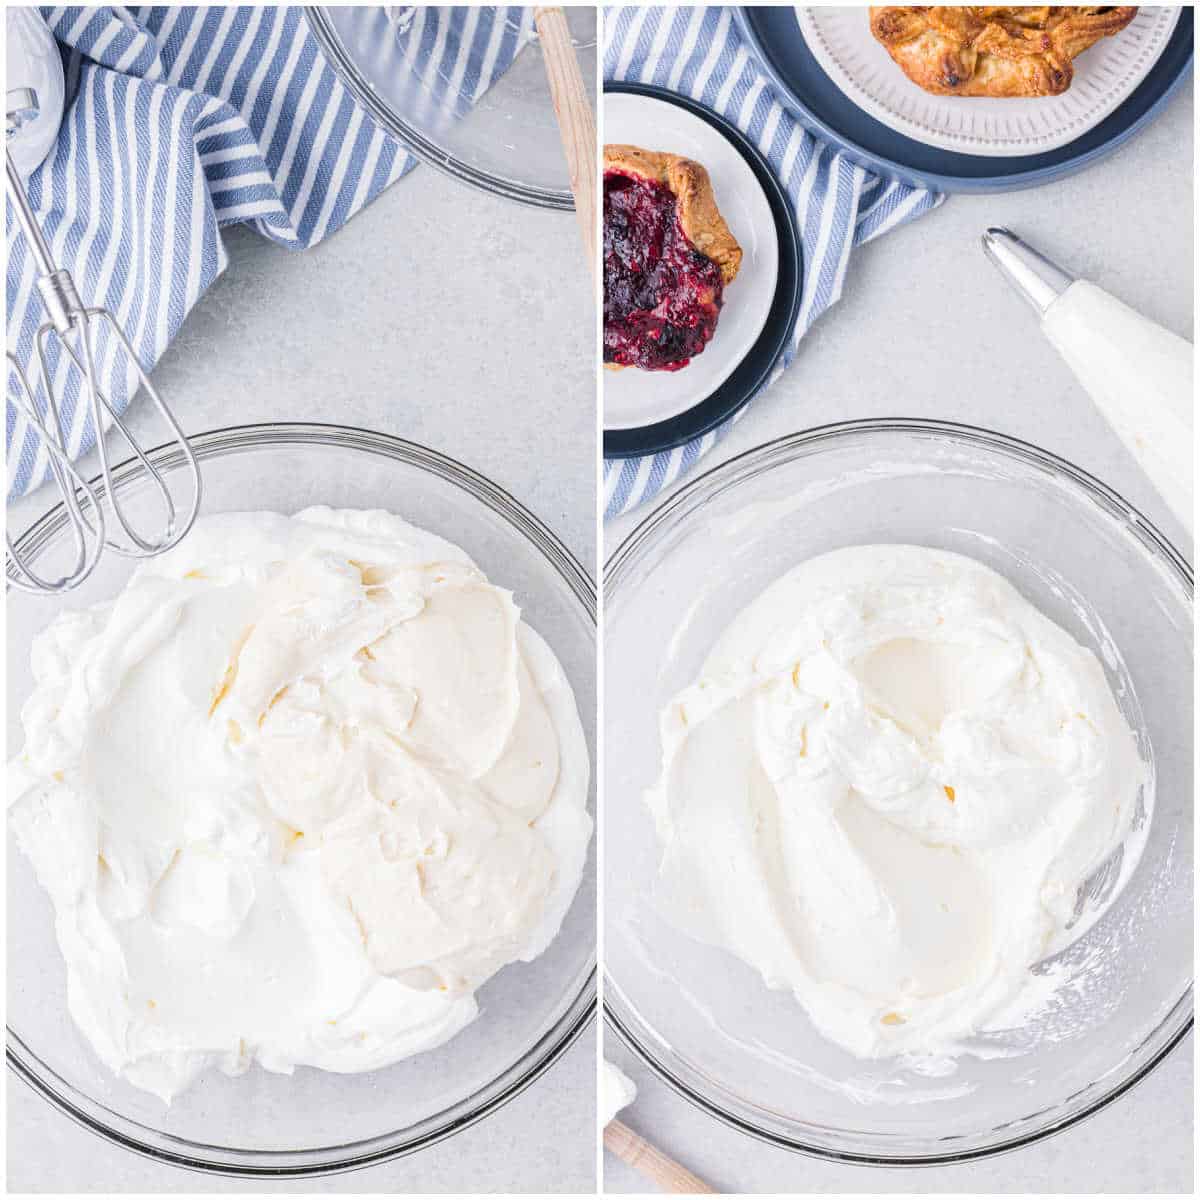 Steps to make stabilized whipped cream.